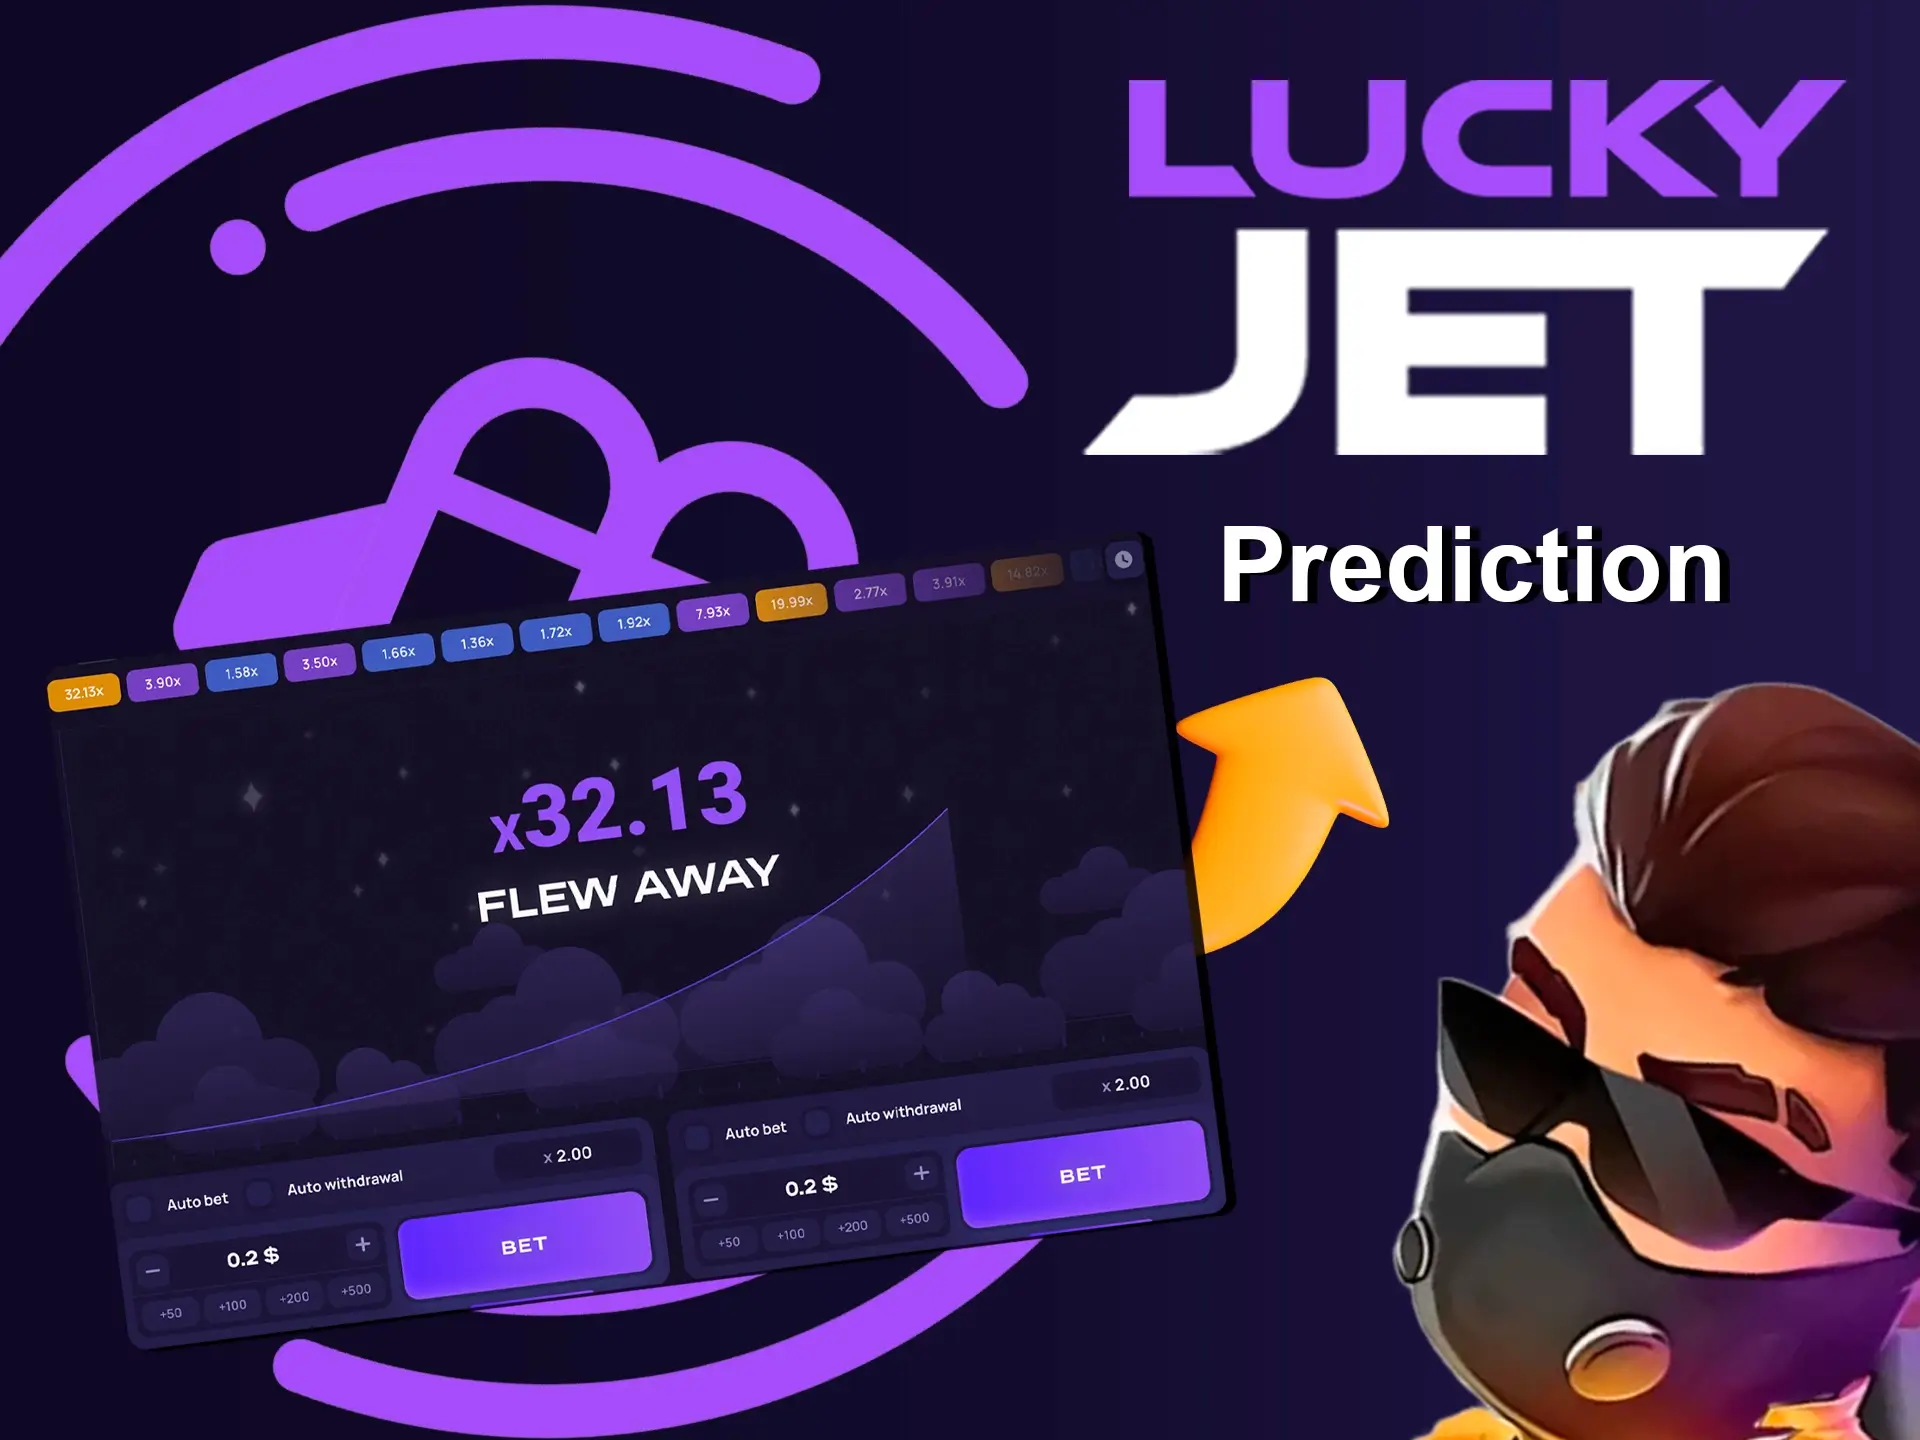 Use Predictor to maximise your profits and win big when playing LuckyJet.